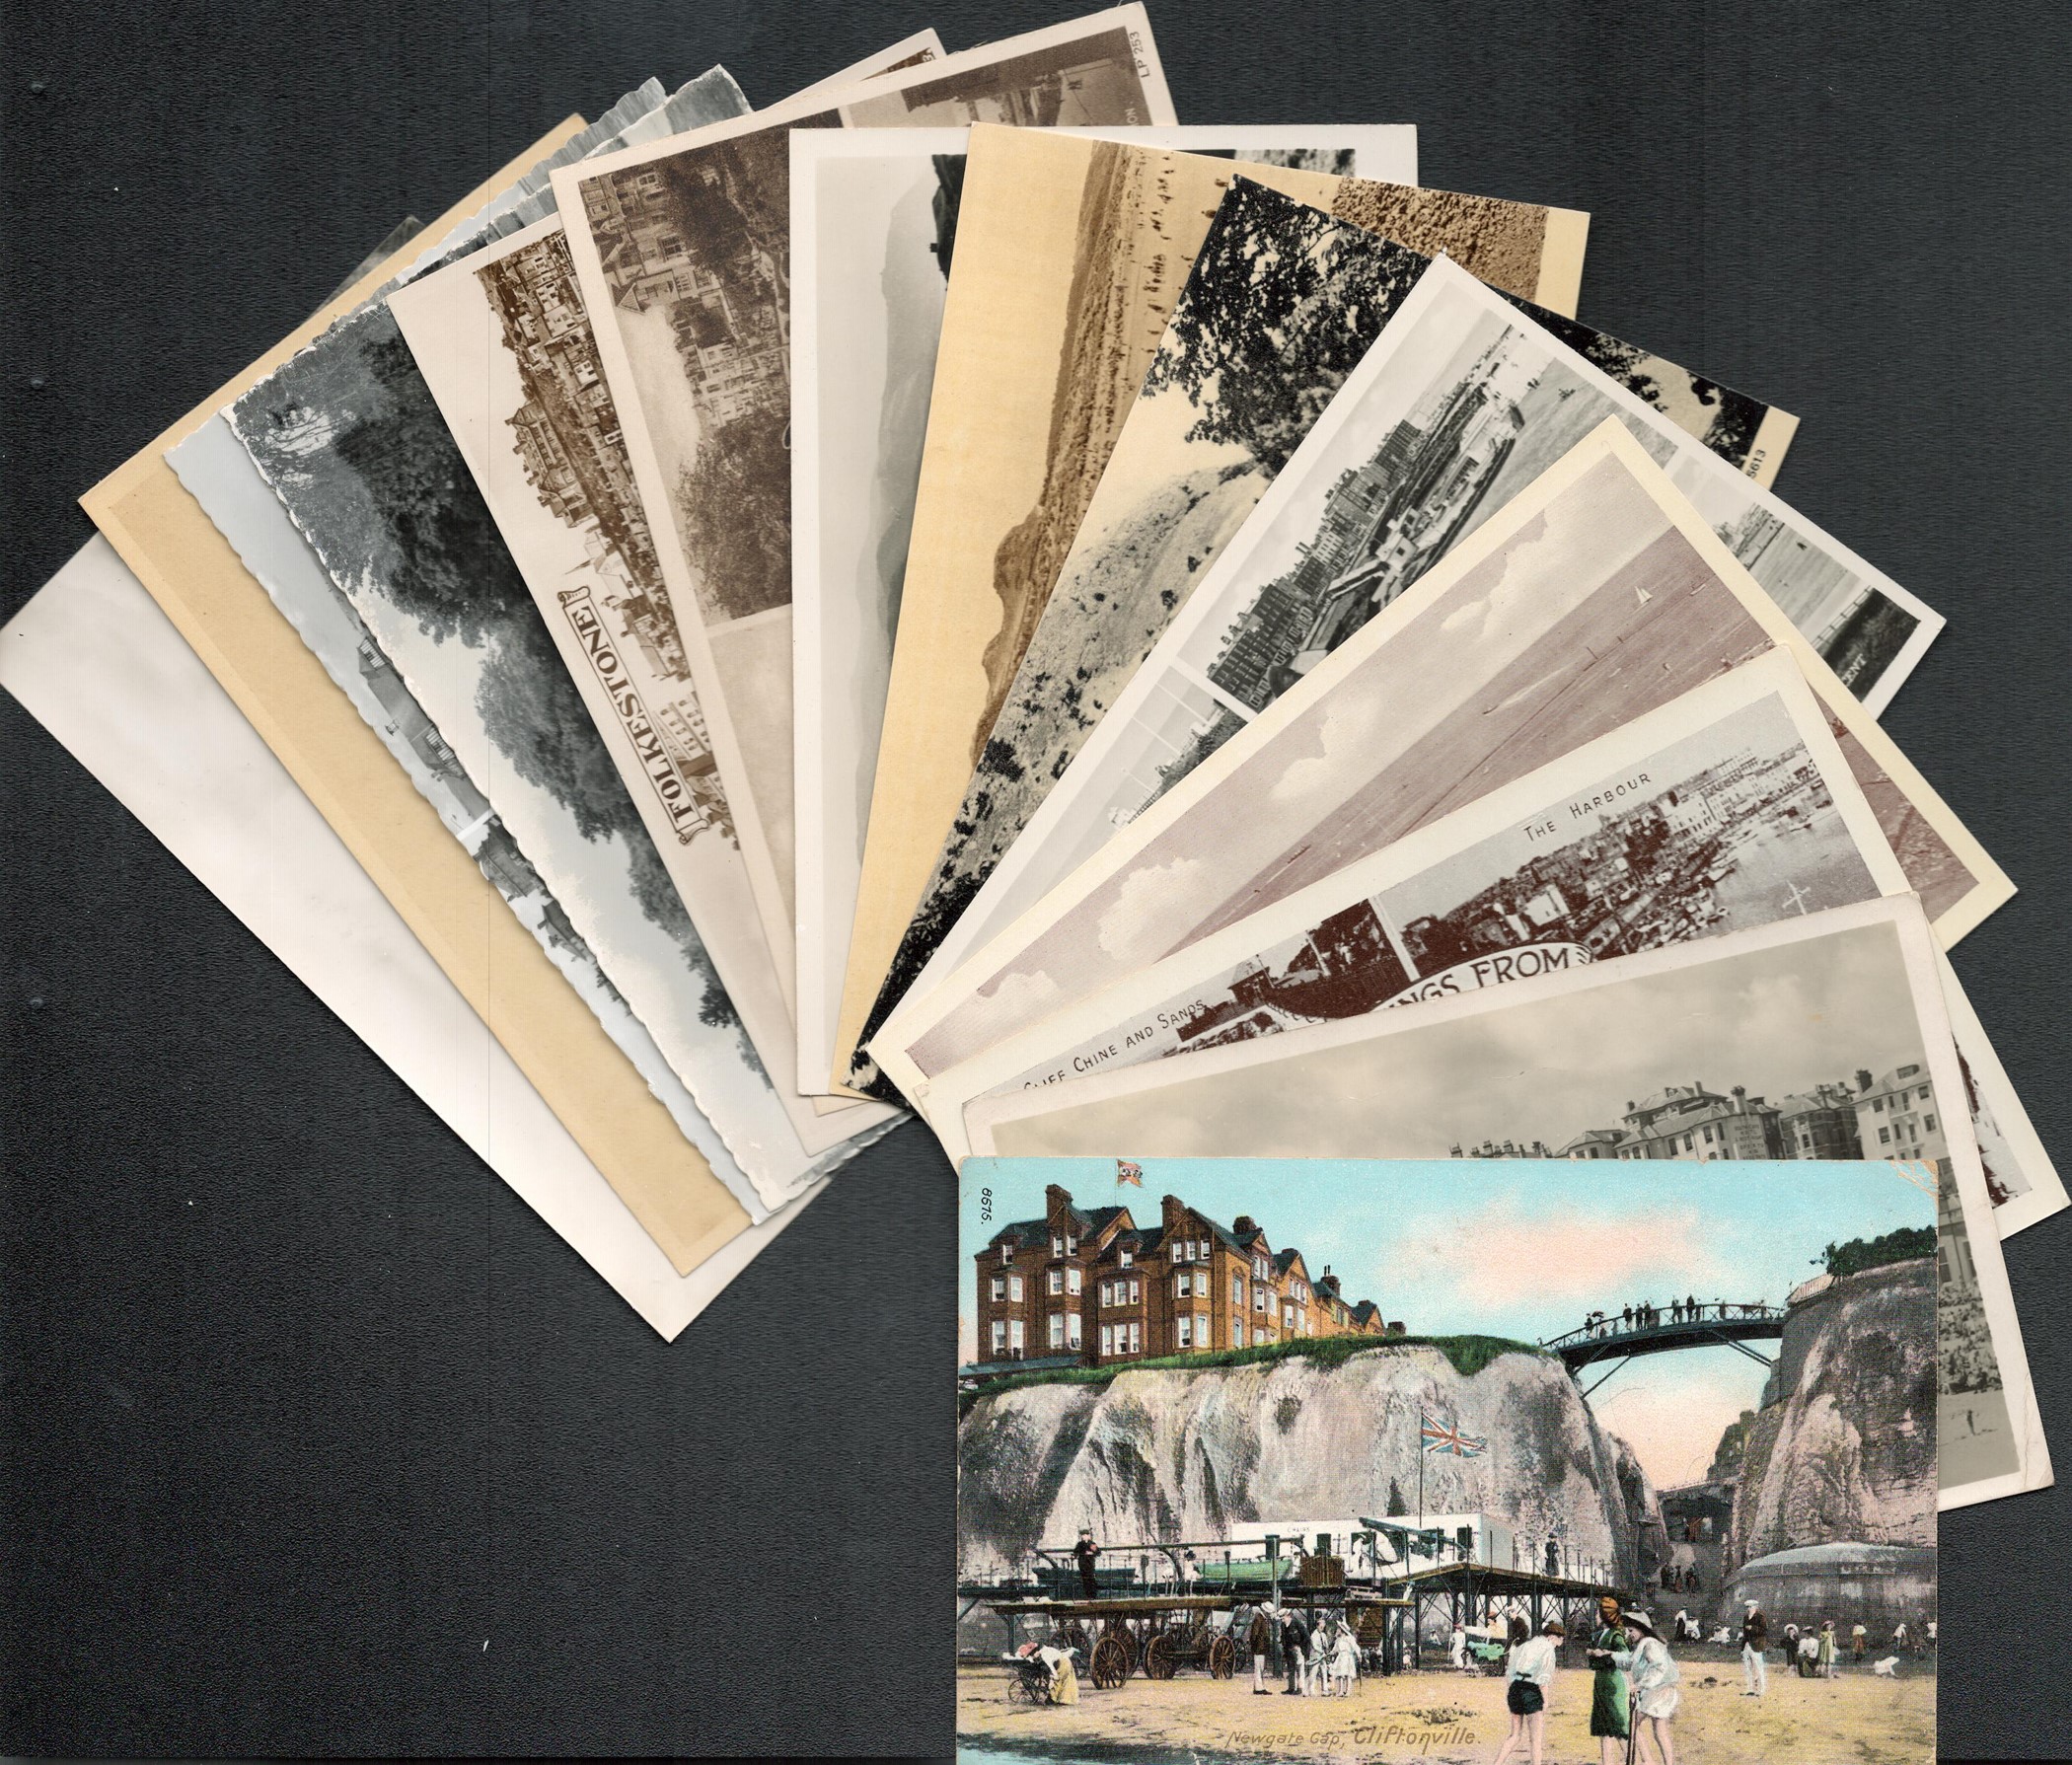 30 old GB seaside postcards. Some franked. Good condition. We combine postage on multiple winning